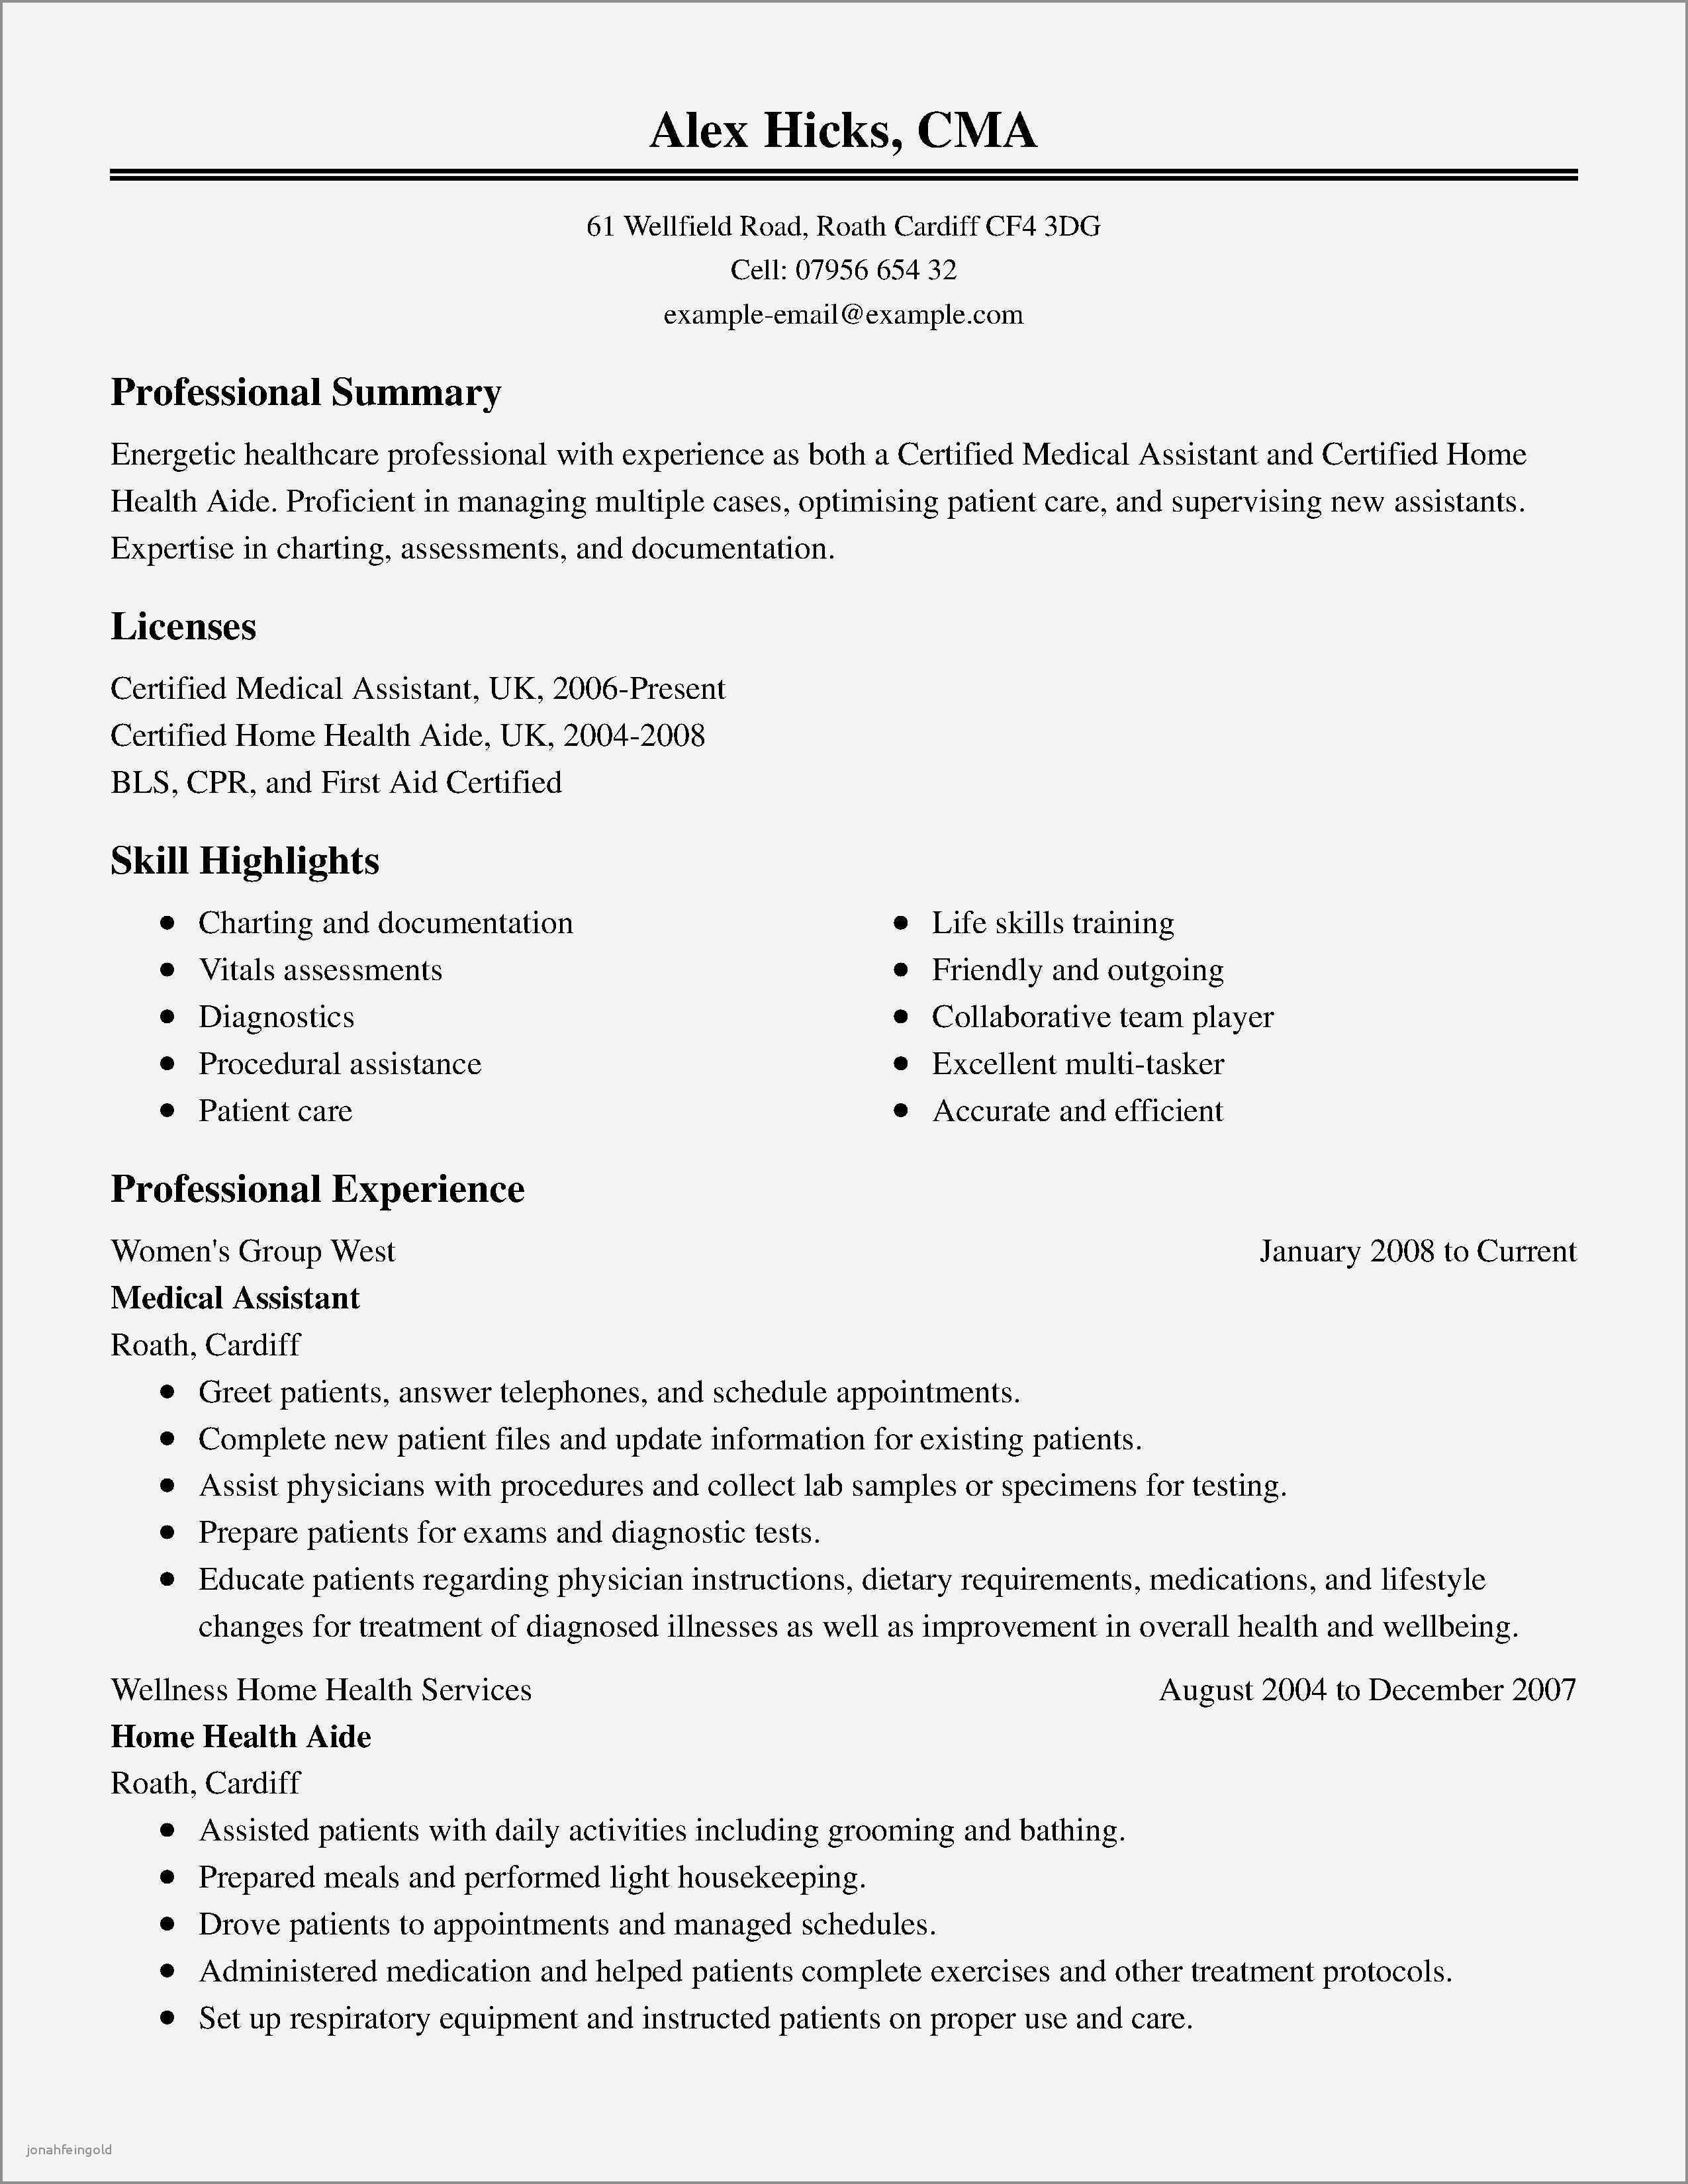 Resumes Examples Customer Service Summary Of Qualificationses Resume Executive Assistant Sample For